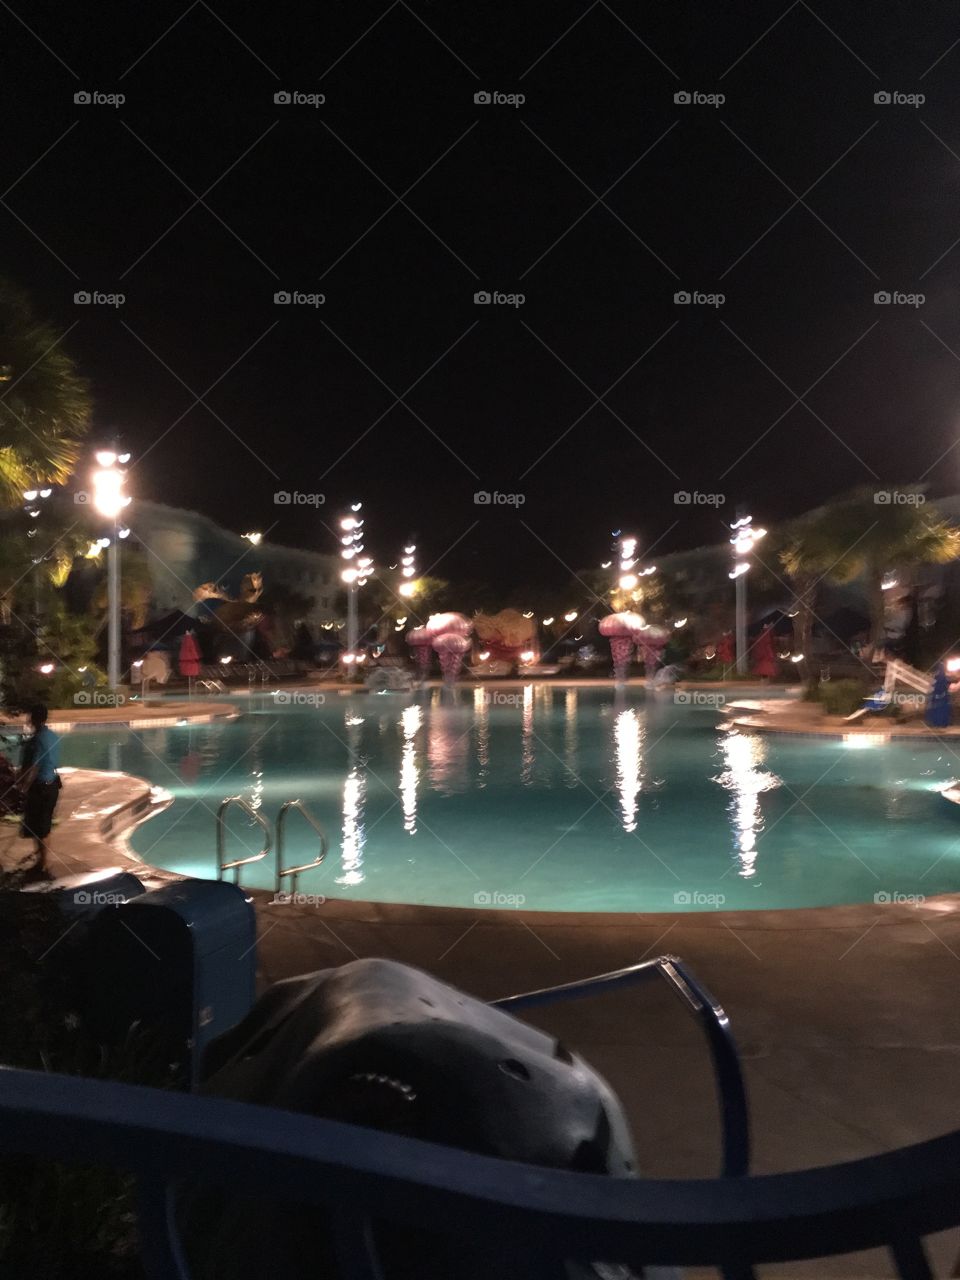 Nighttime at the pool at Art of Animation Resort